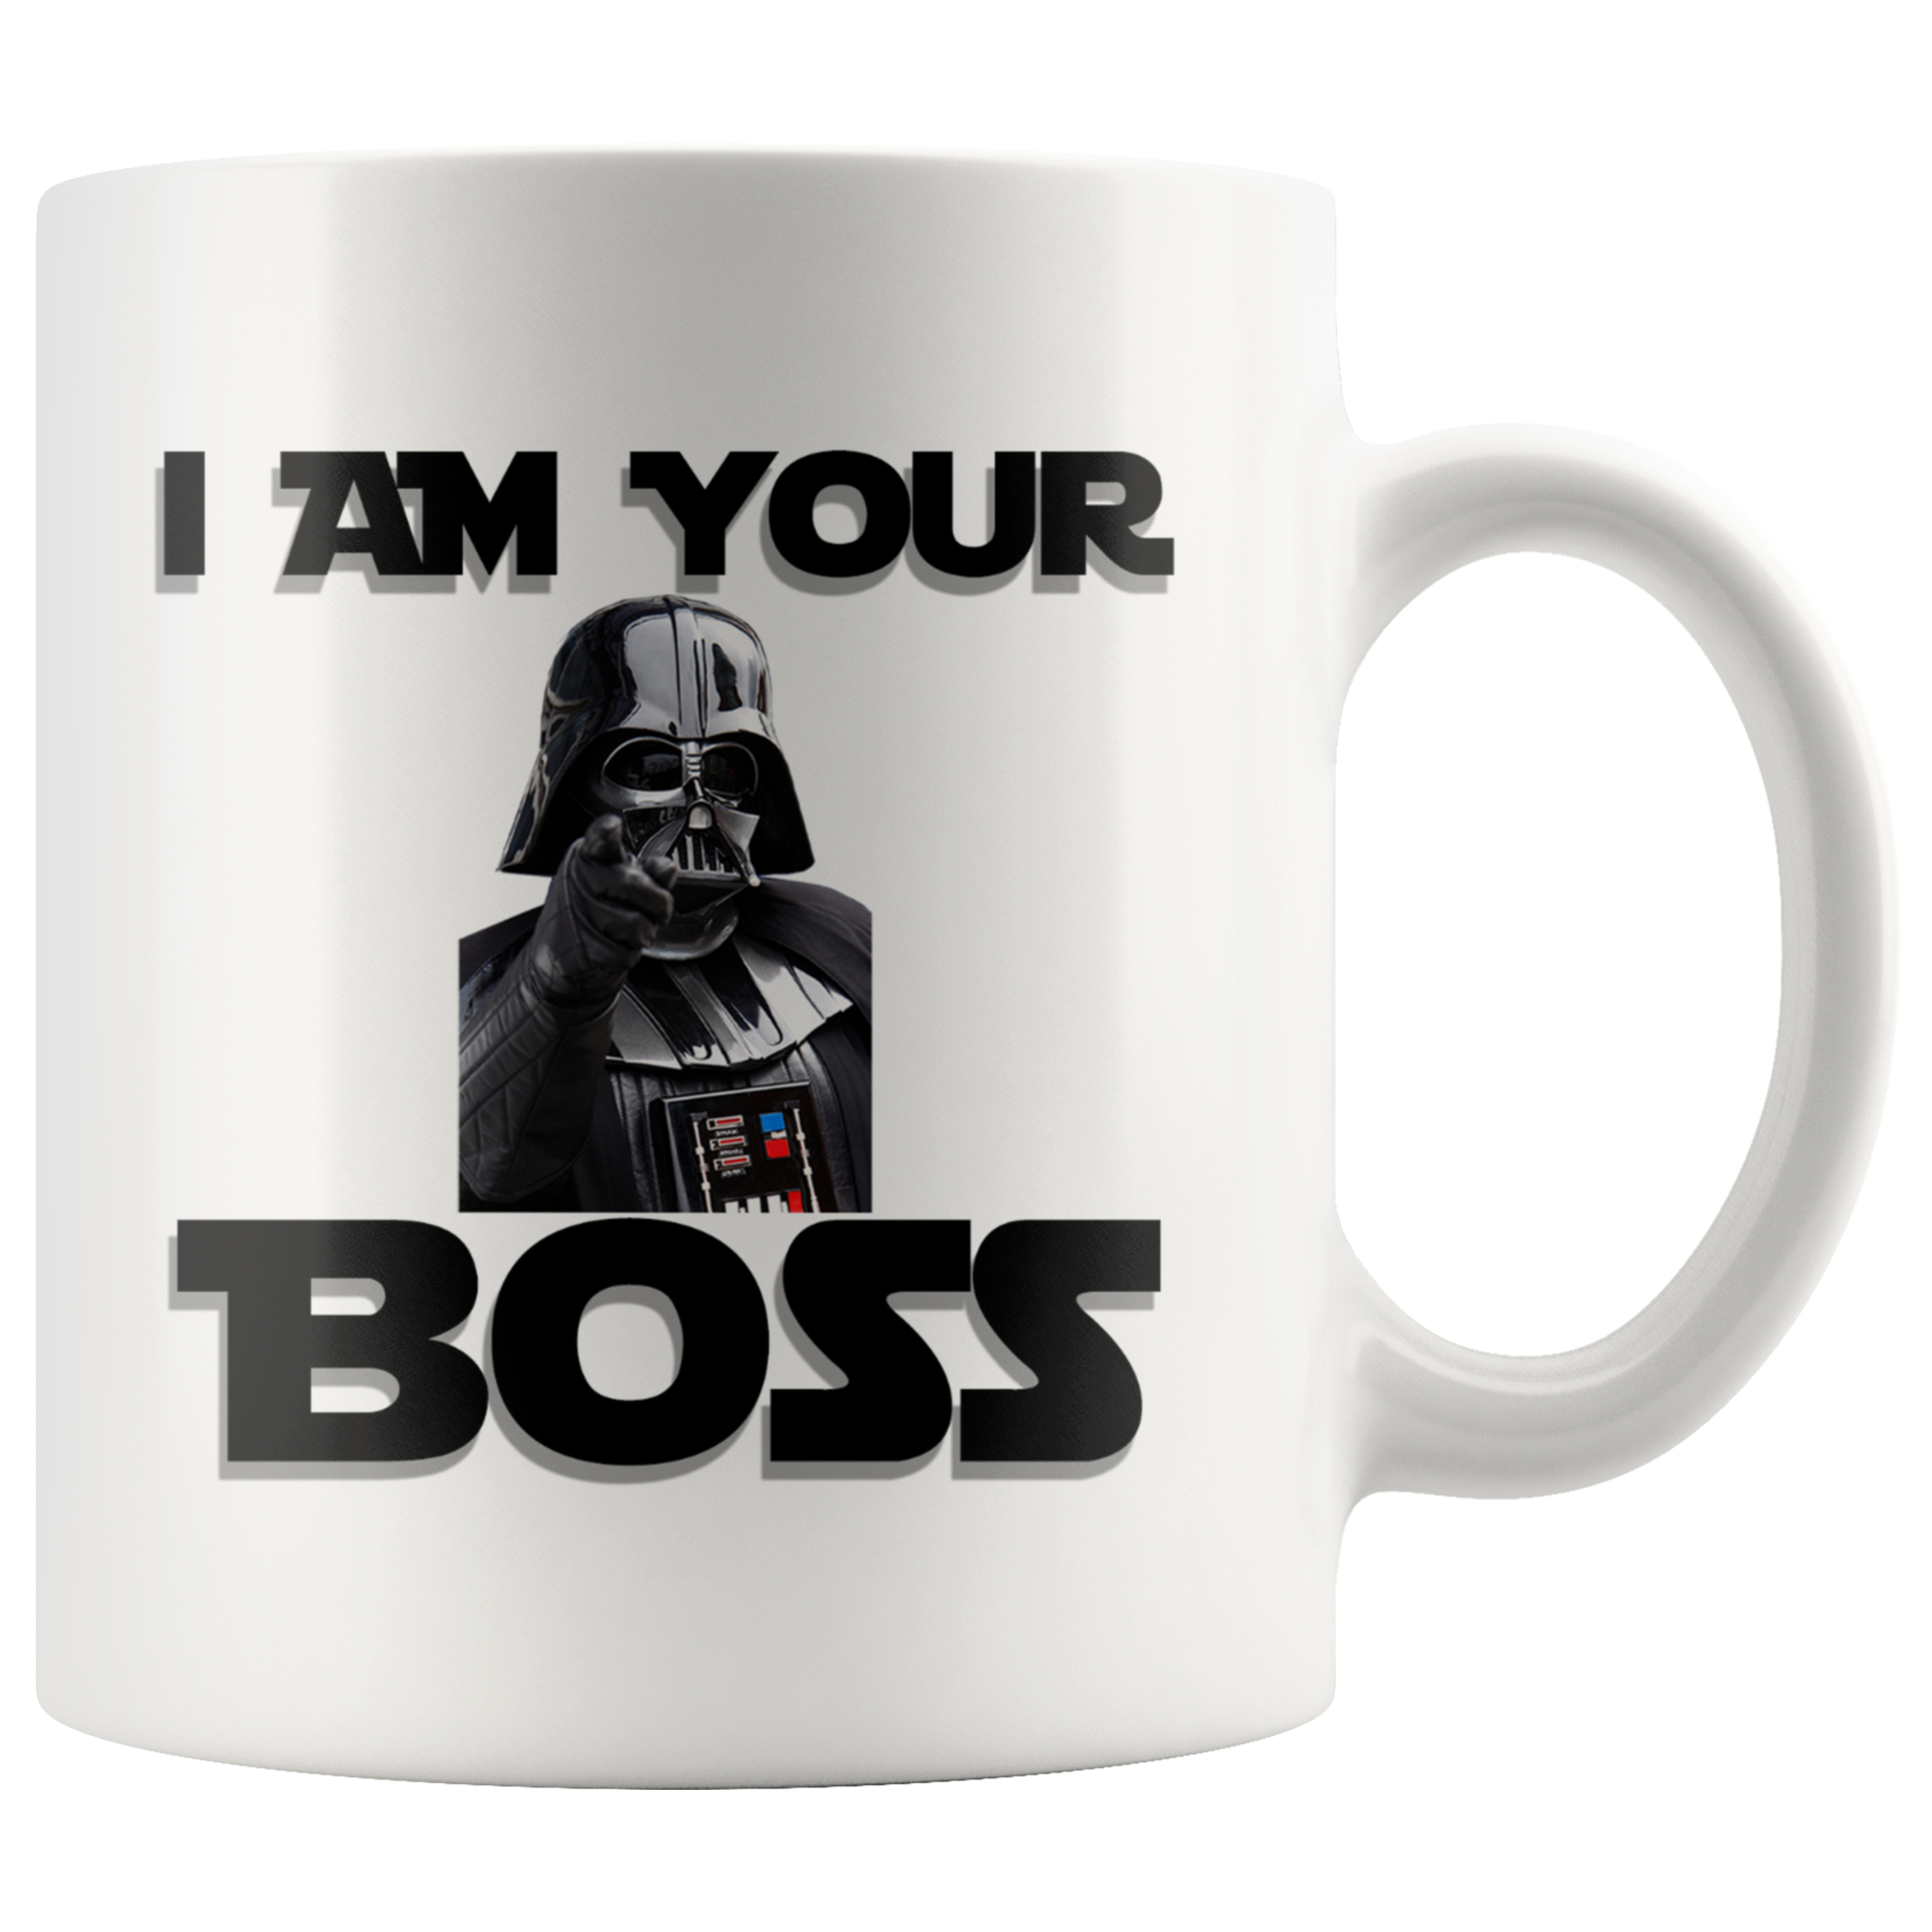 I Am Your Boss Coffee Mug - Coffee Cups Gift Idea For Men or Women Boss